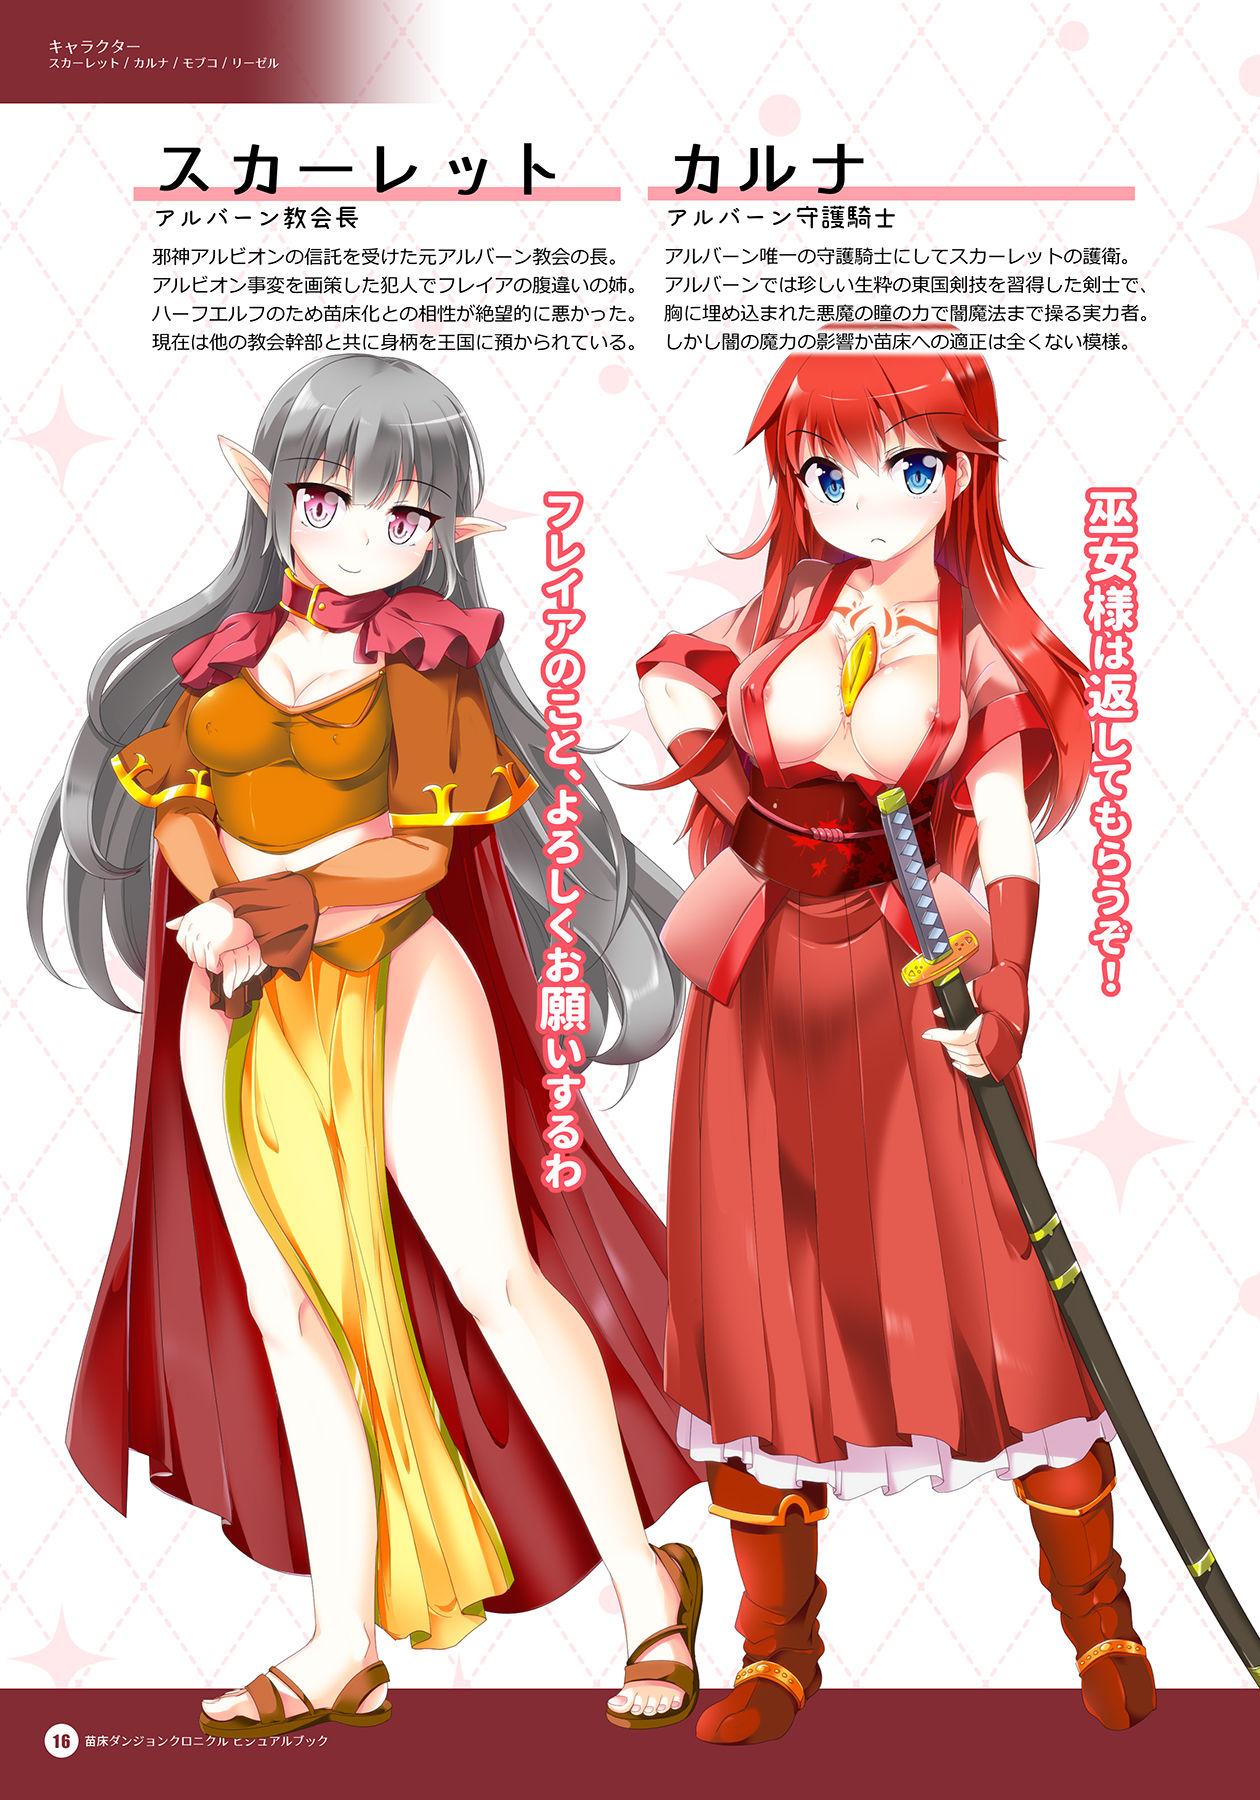 Naedoko Dungeon Chronicle Official Design Works 14